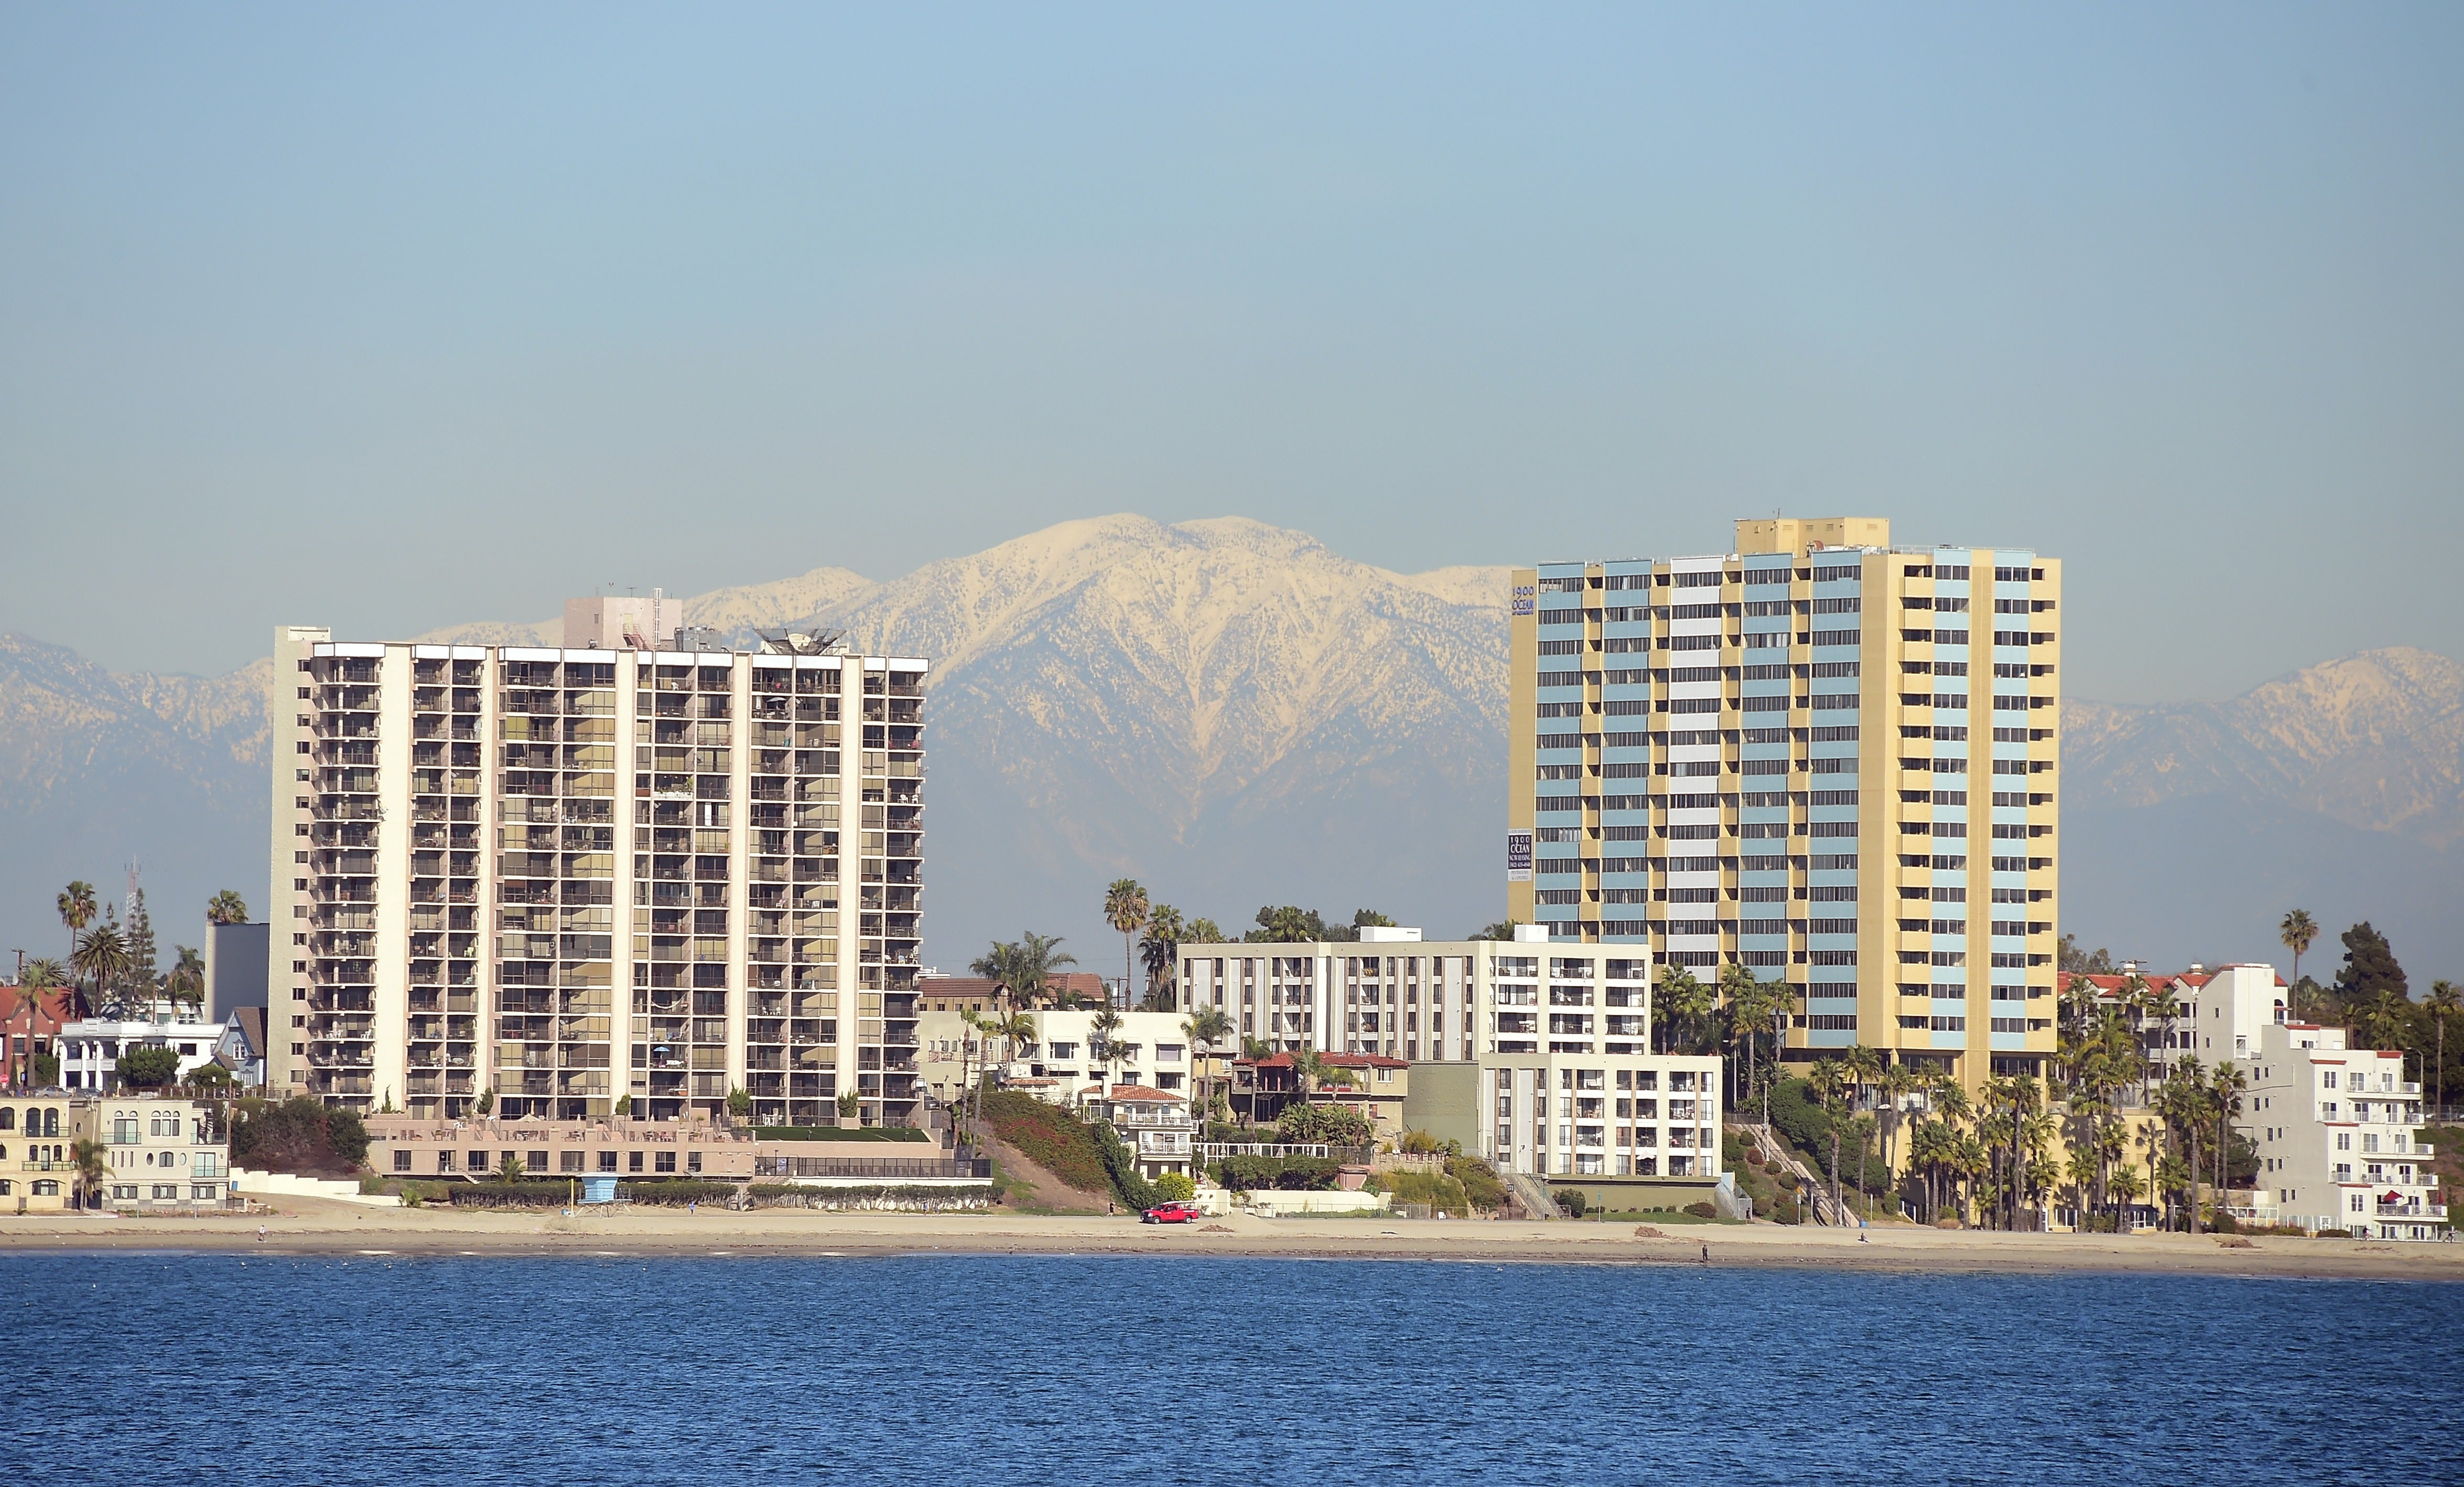 A view of Long Beach, California. The city currently limits the number of short-term, unsupervised rentals to 1,000